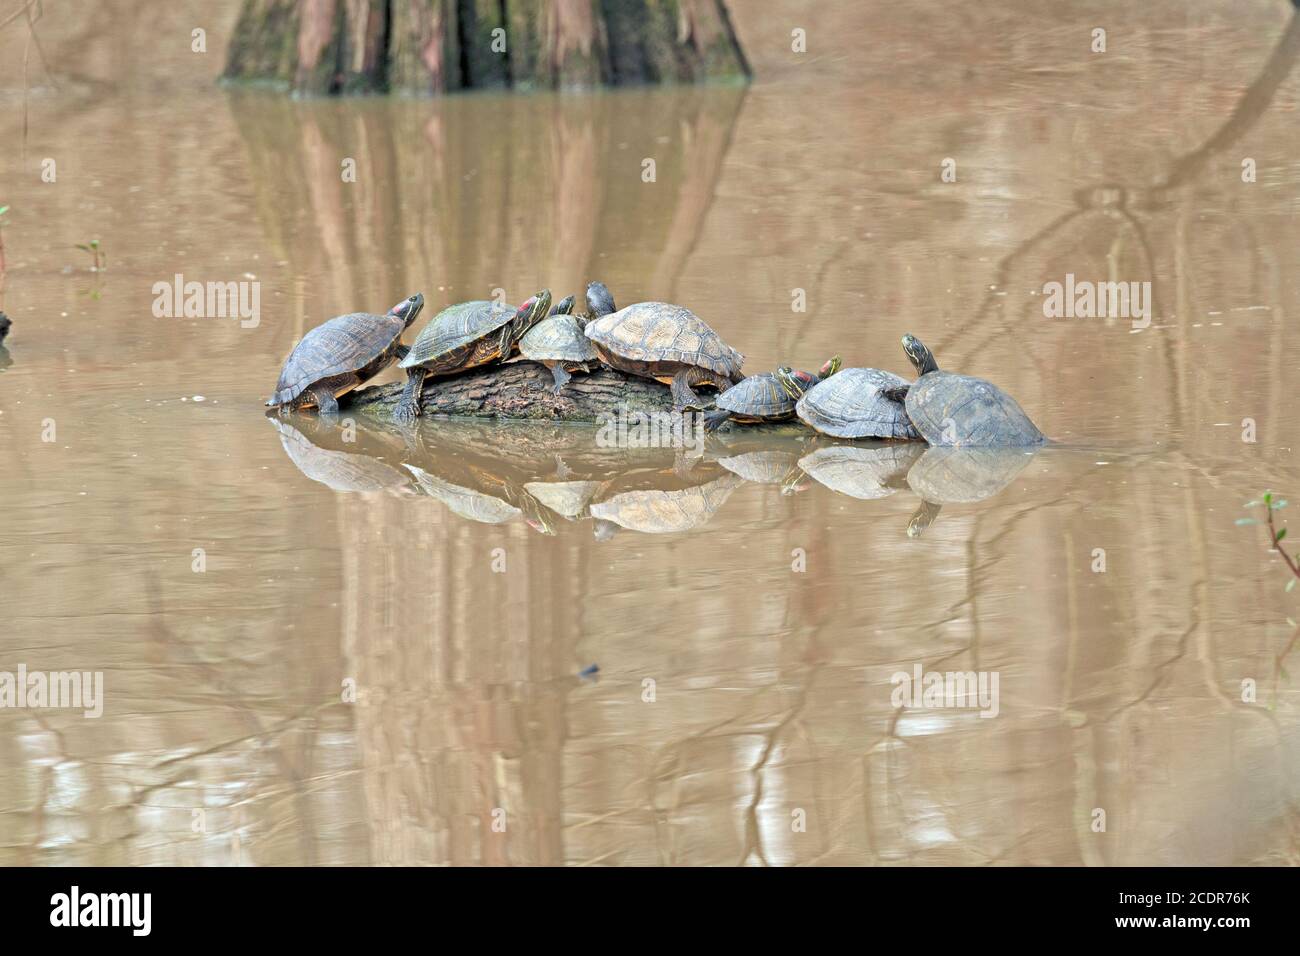 Turtles Crowding Together on a Log in Anahuac National Wildlife Refuge in Texas Stock Photo